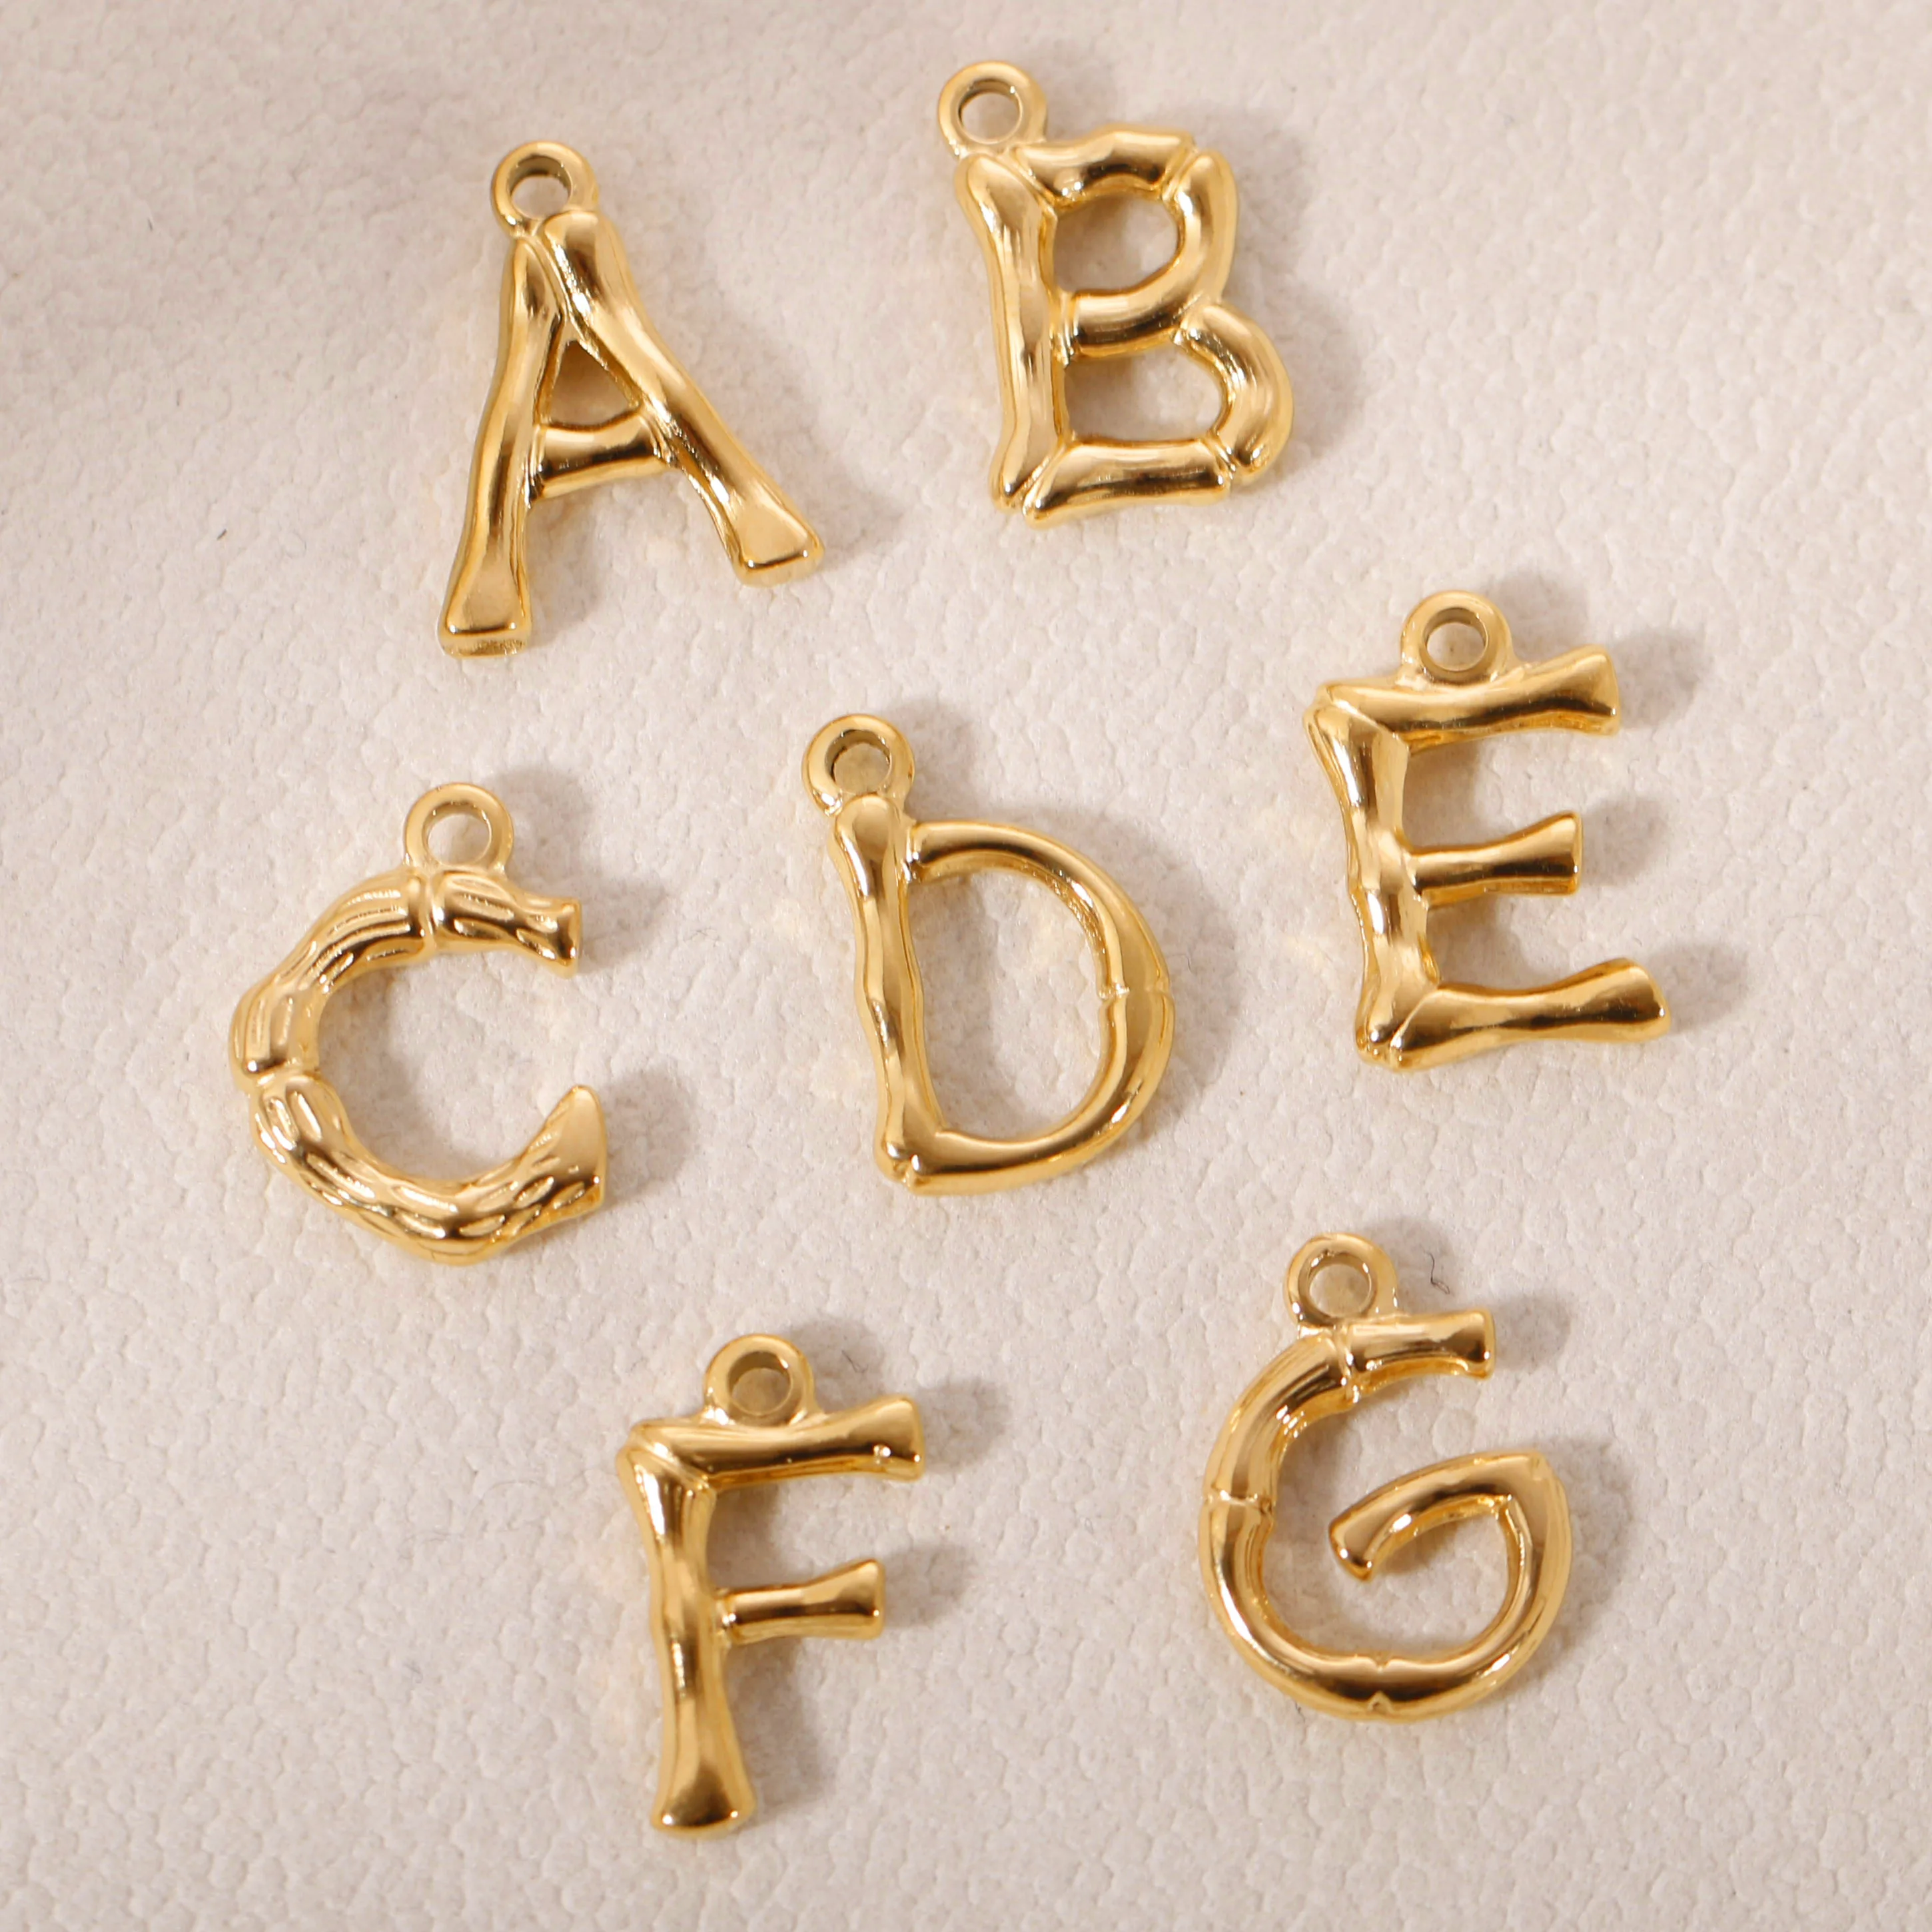 

3Pcs/Lot English Letter Charms Stainless Steel PVD Plating Initial A-Z Alphabet Pendant DIY Personalized Jewelry Making Finding